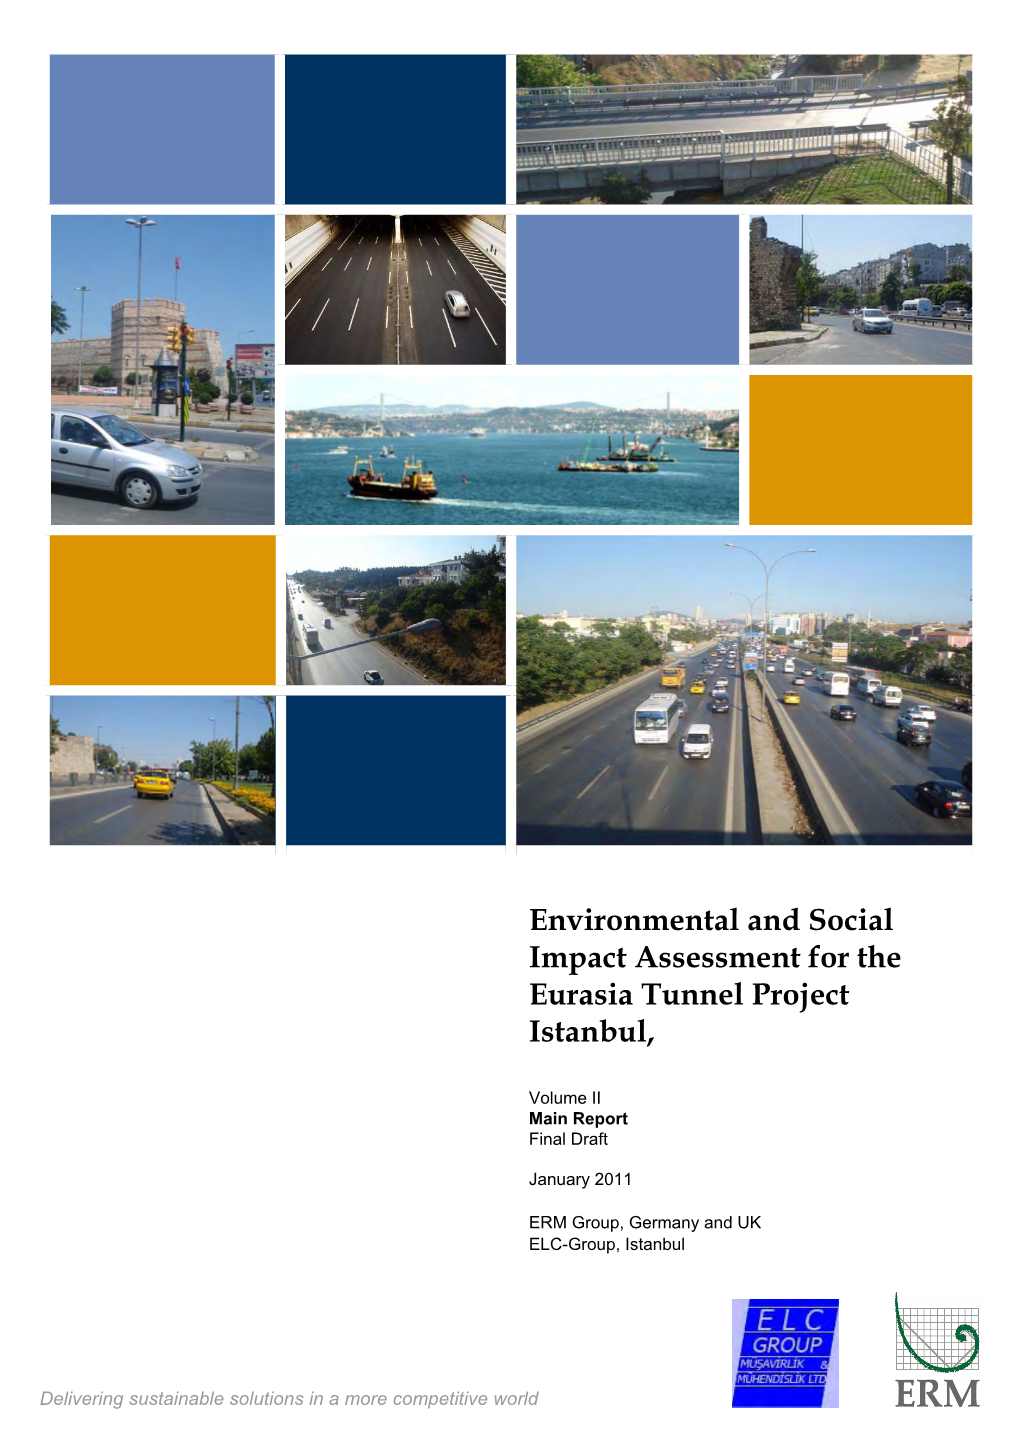 Environmental and Social Impact Assessment for the Eurasia Tunnel Project Istanbul